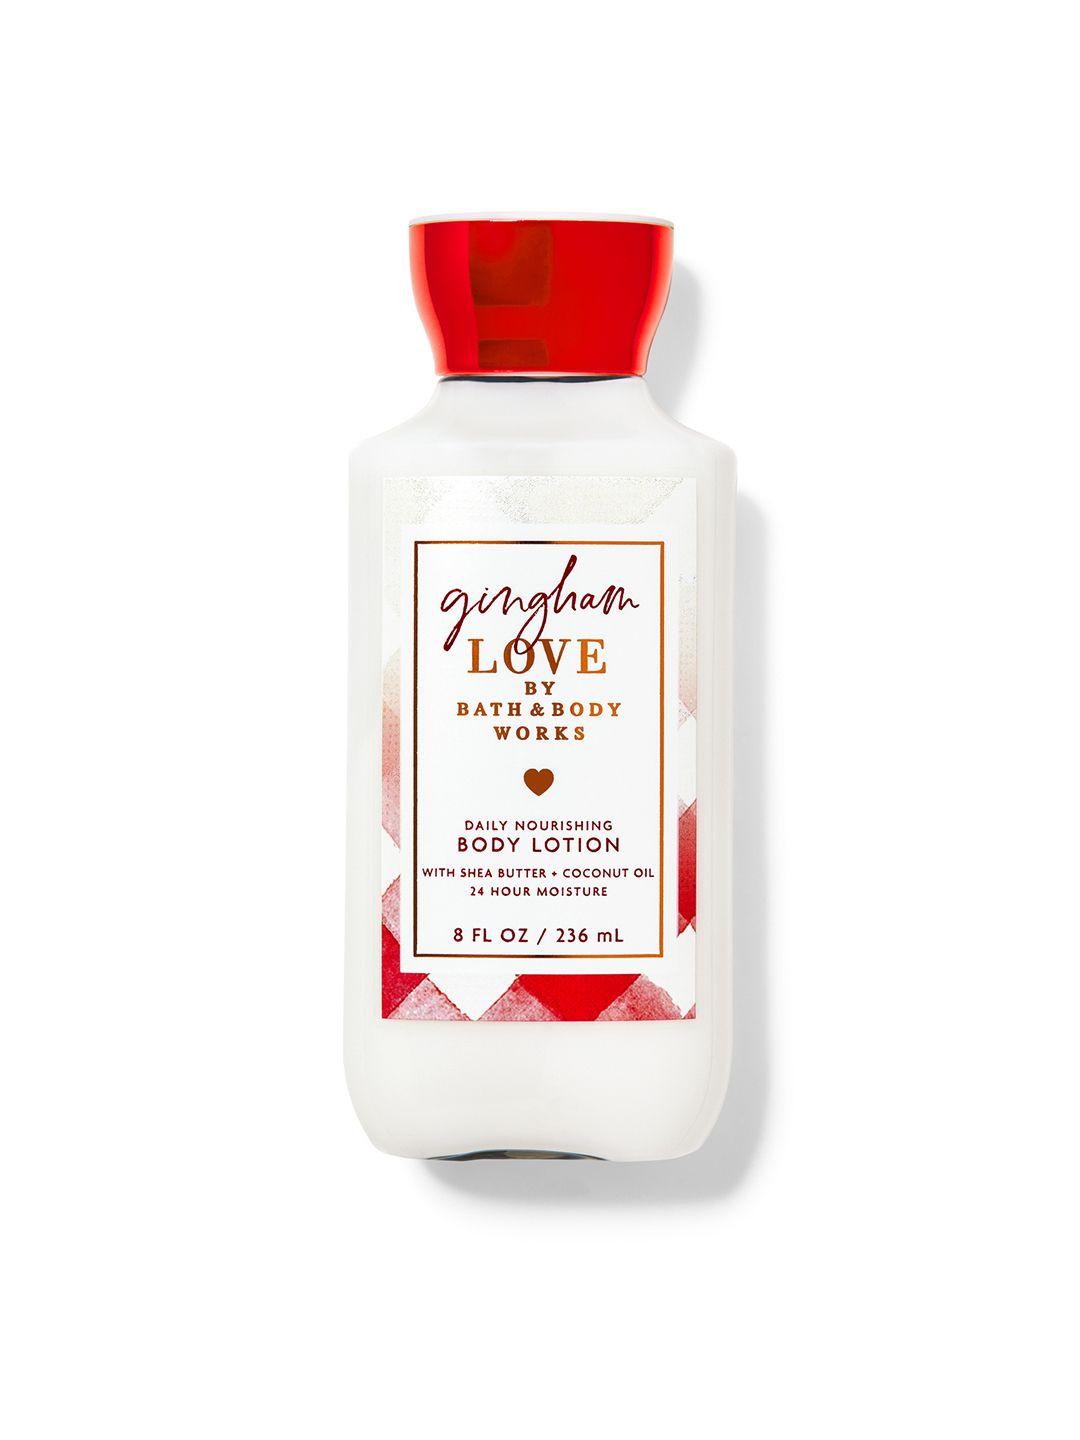 bath & body works gingham love 24 hour moisture body lotion with shea butter - 236 ml